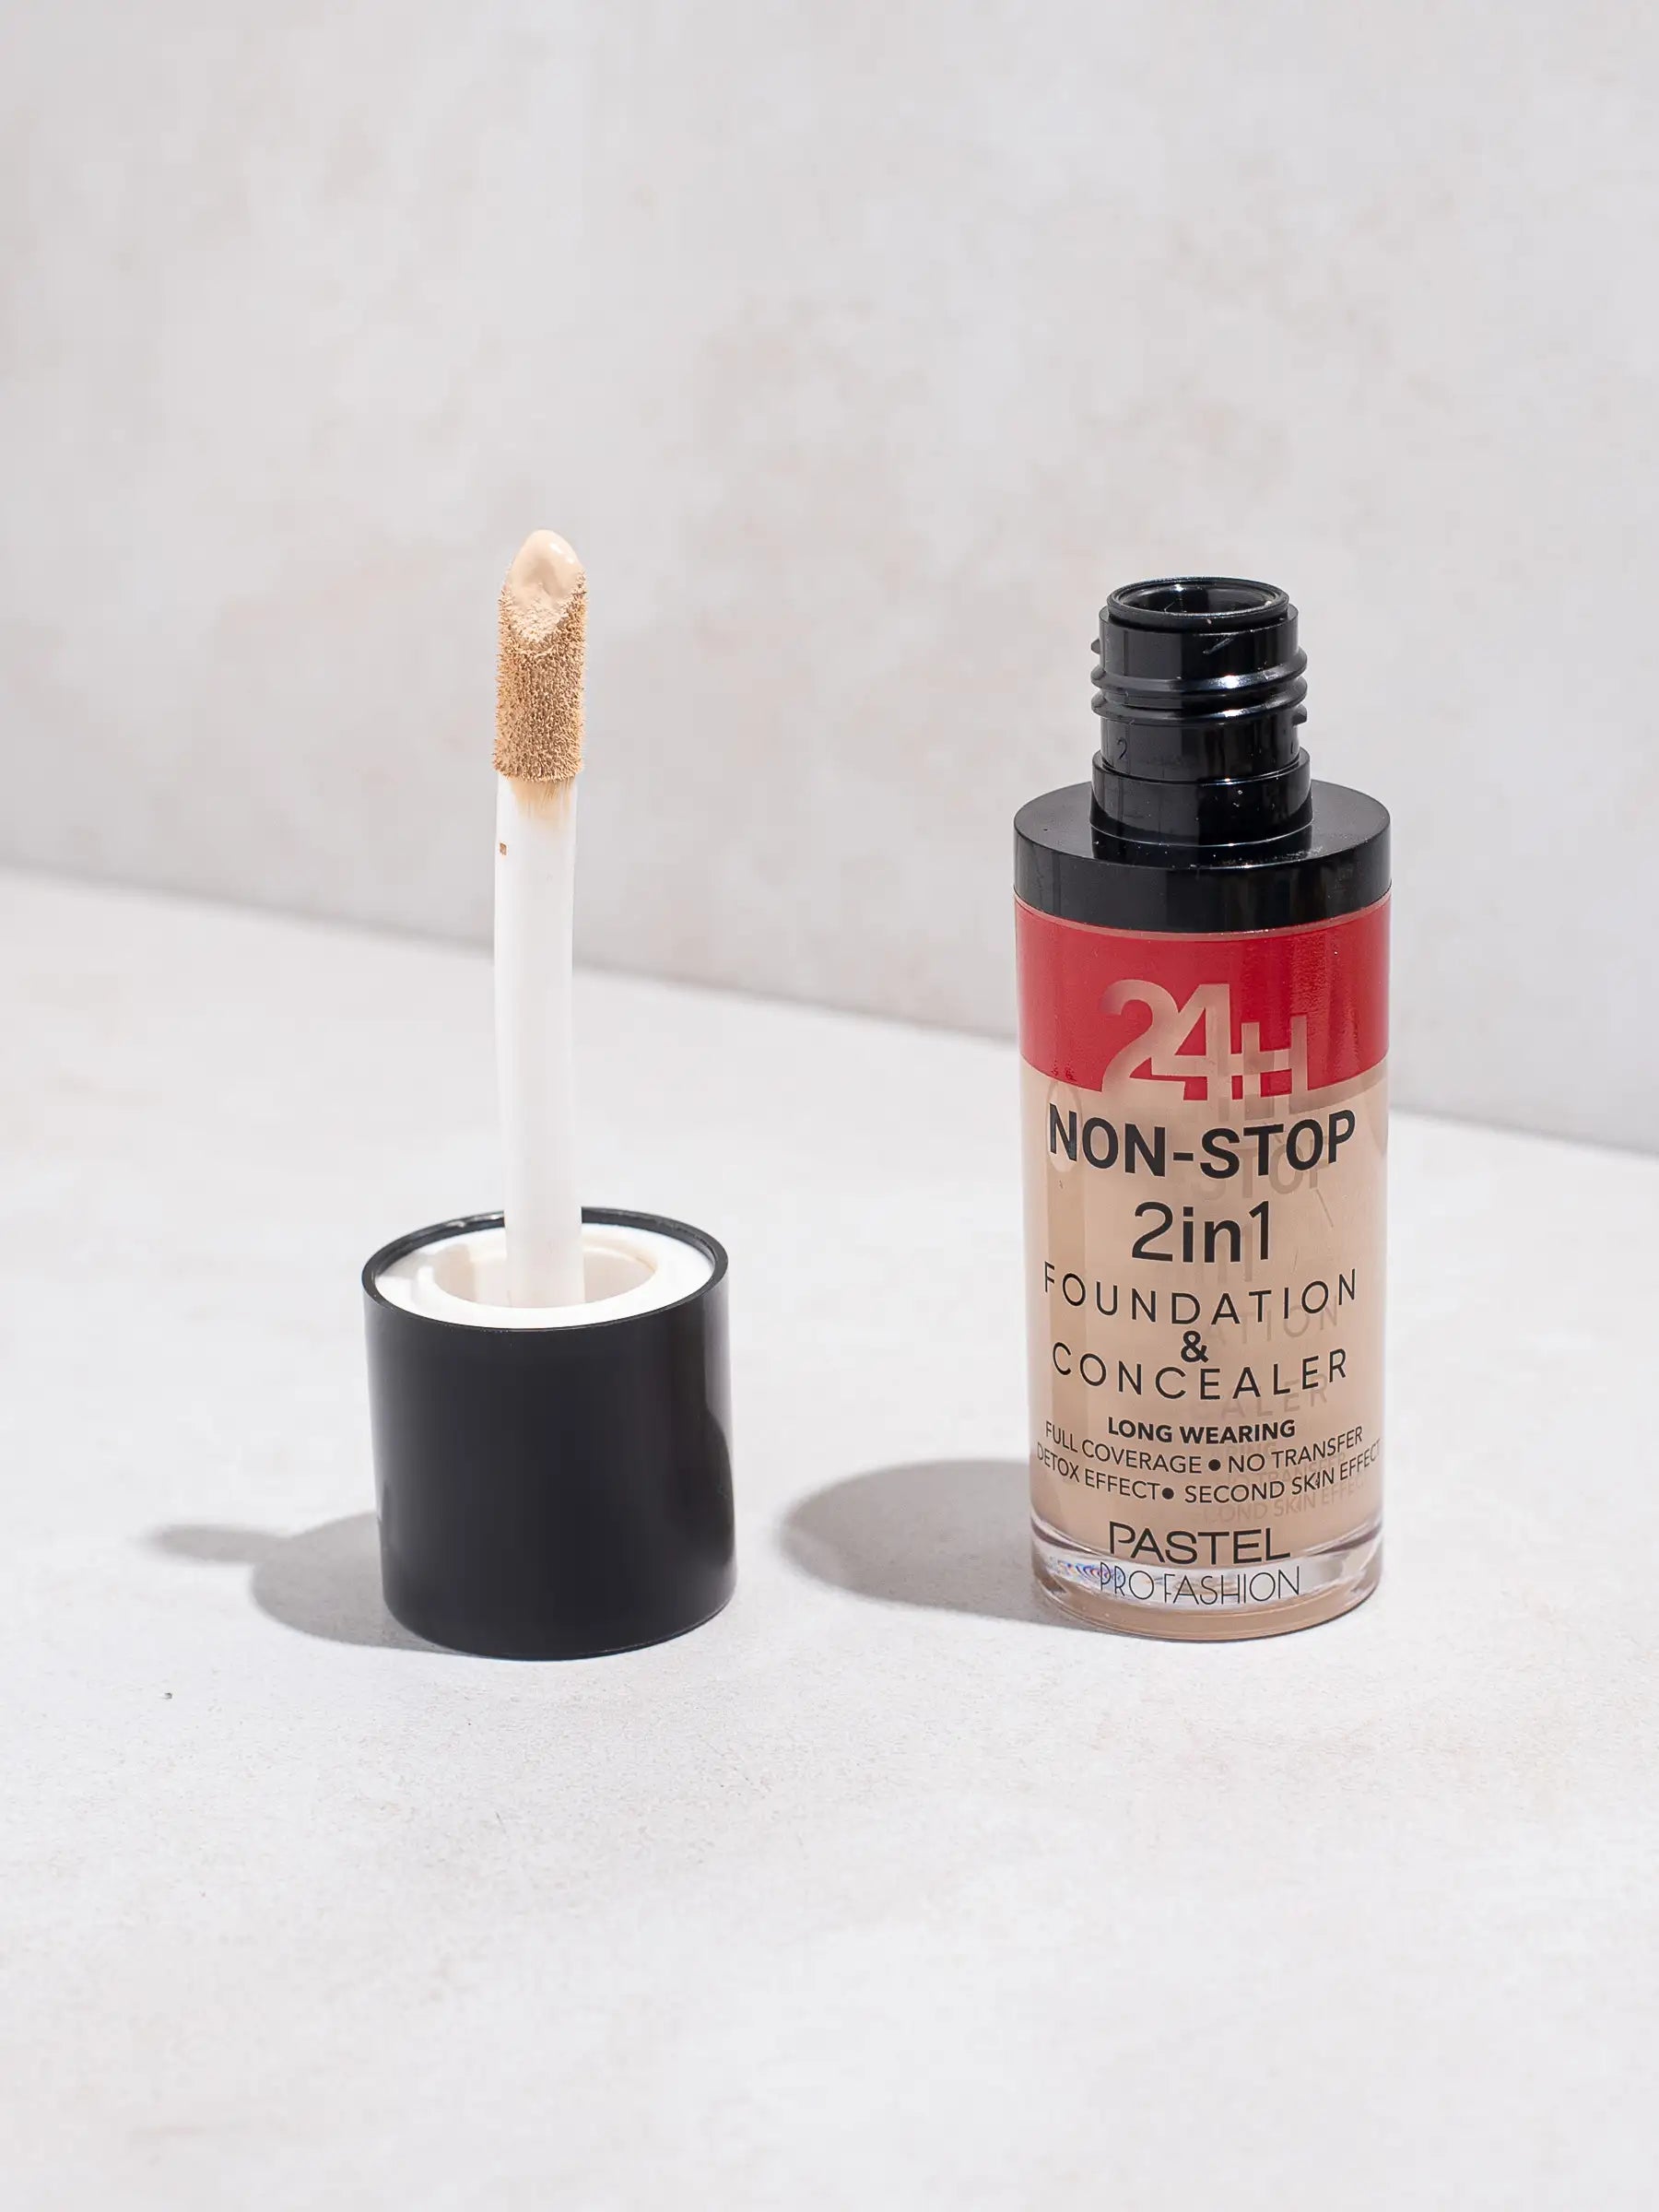 24H NON STOP 2IN1 FOUNDATION & CONCEALER